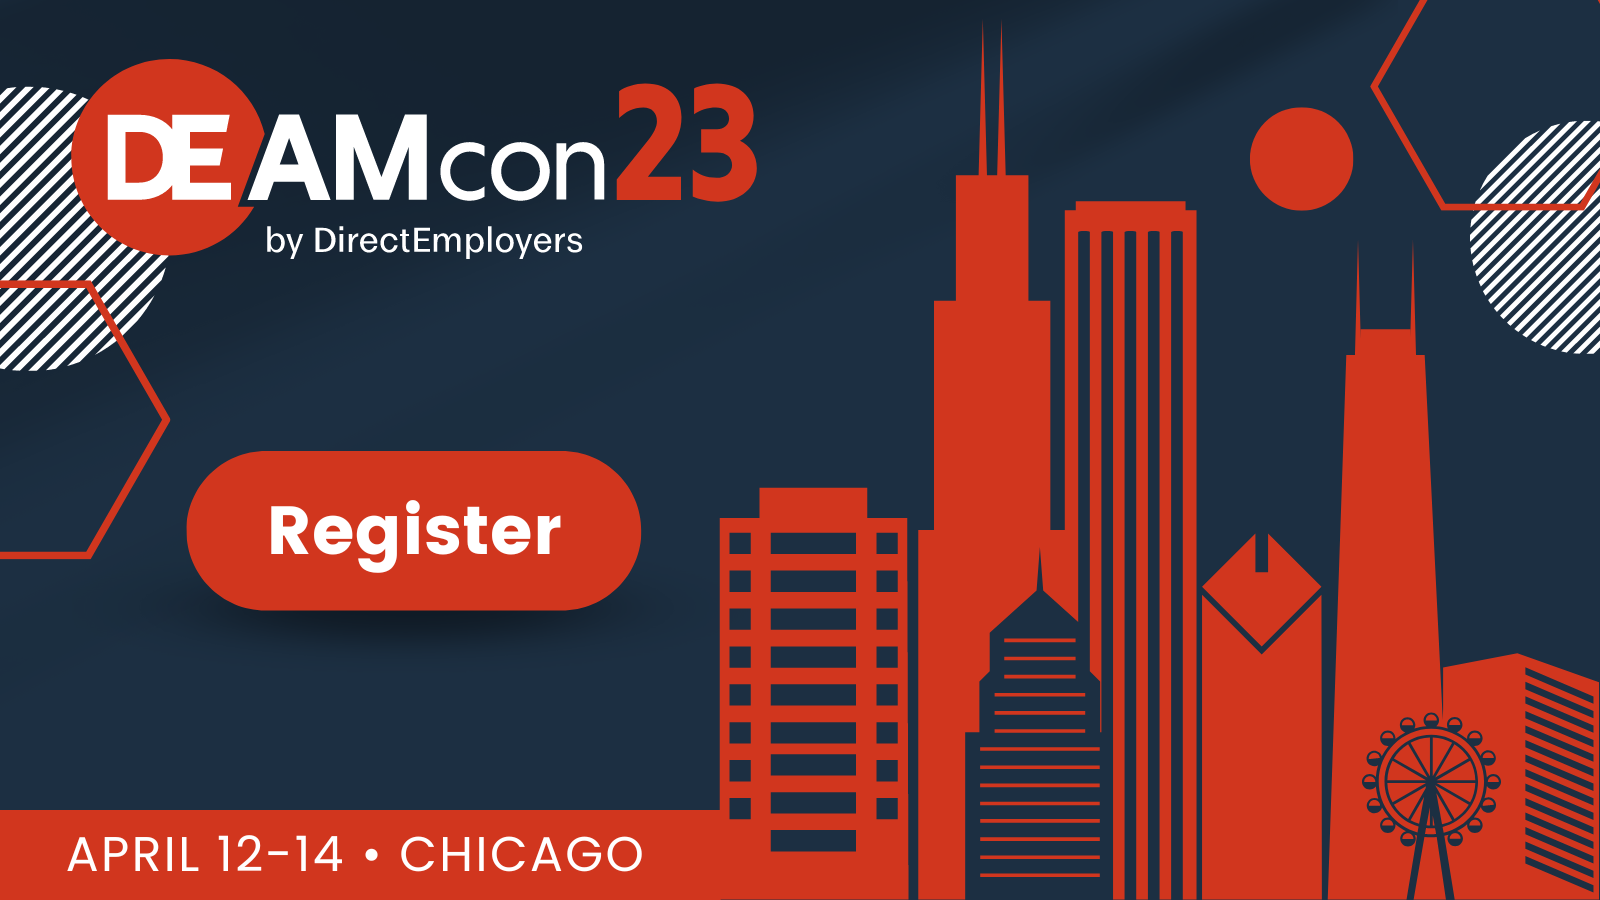 DEAMcon23 Save the Date Chicago April 12-14, 2023